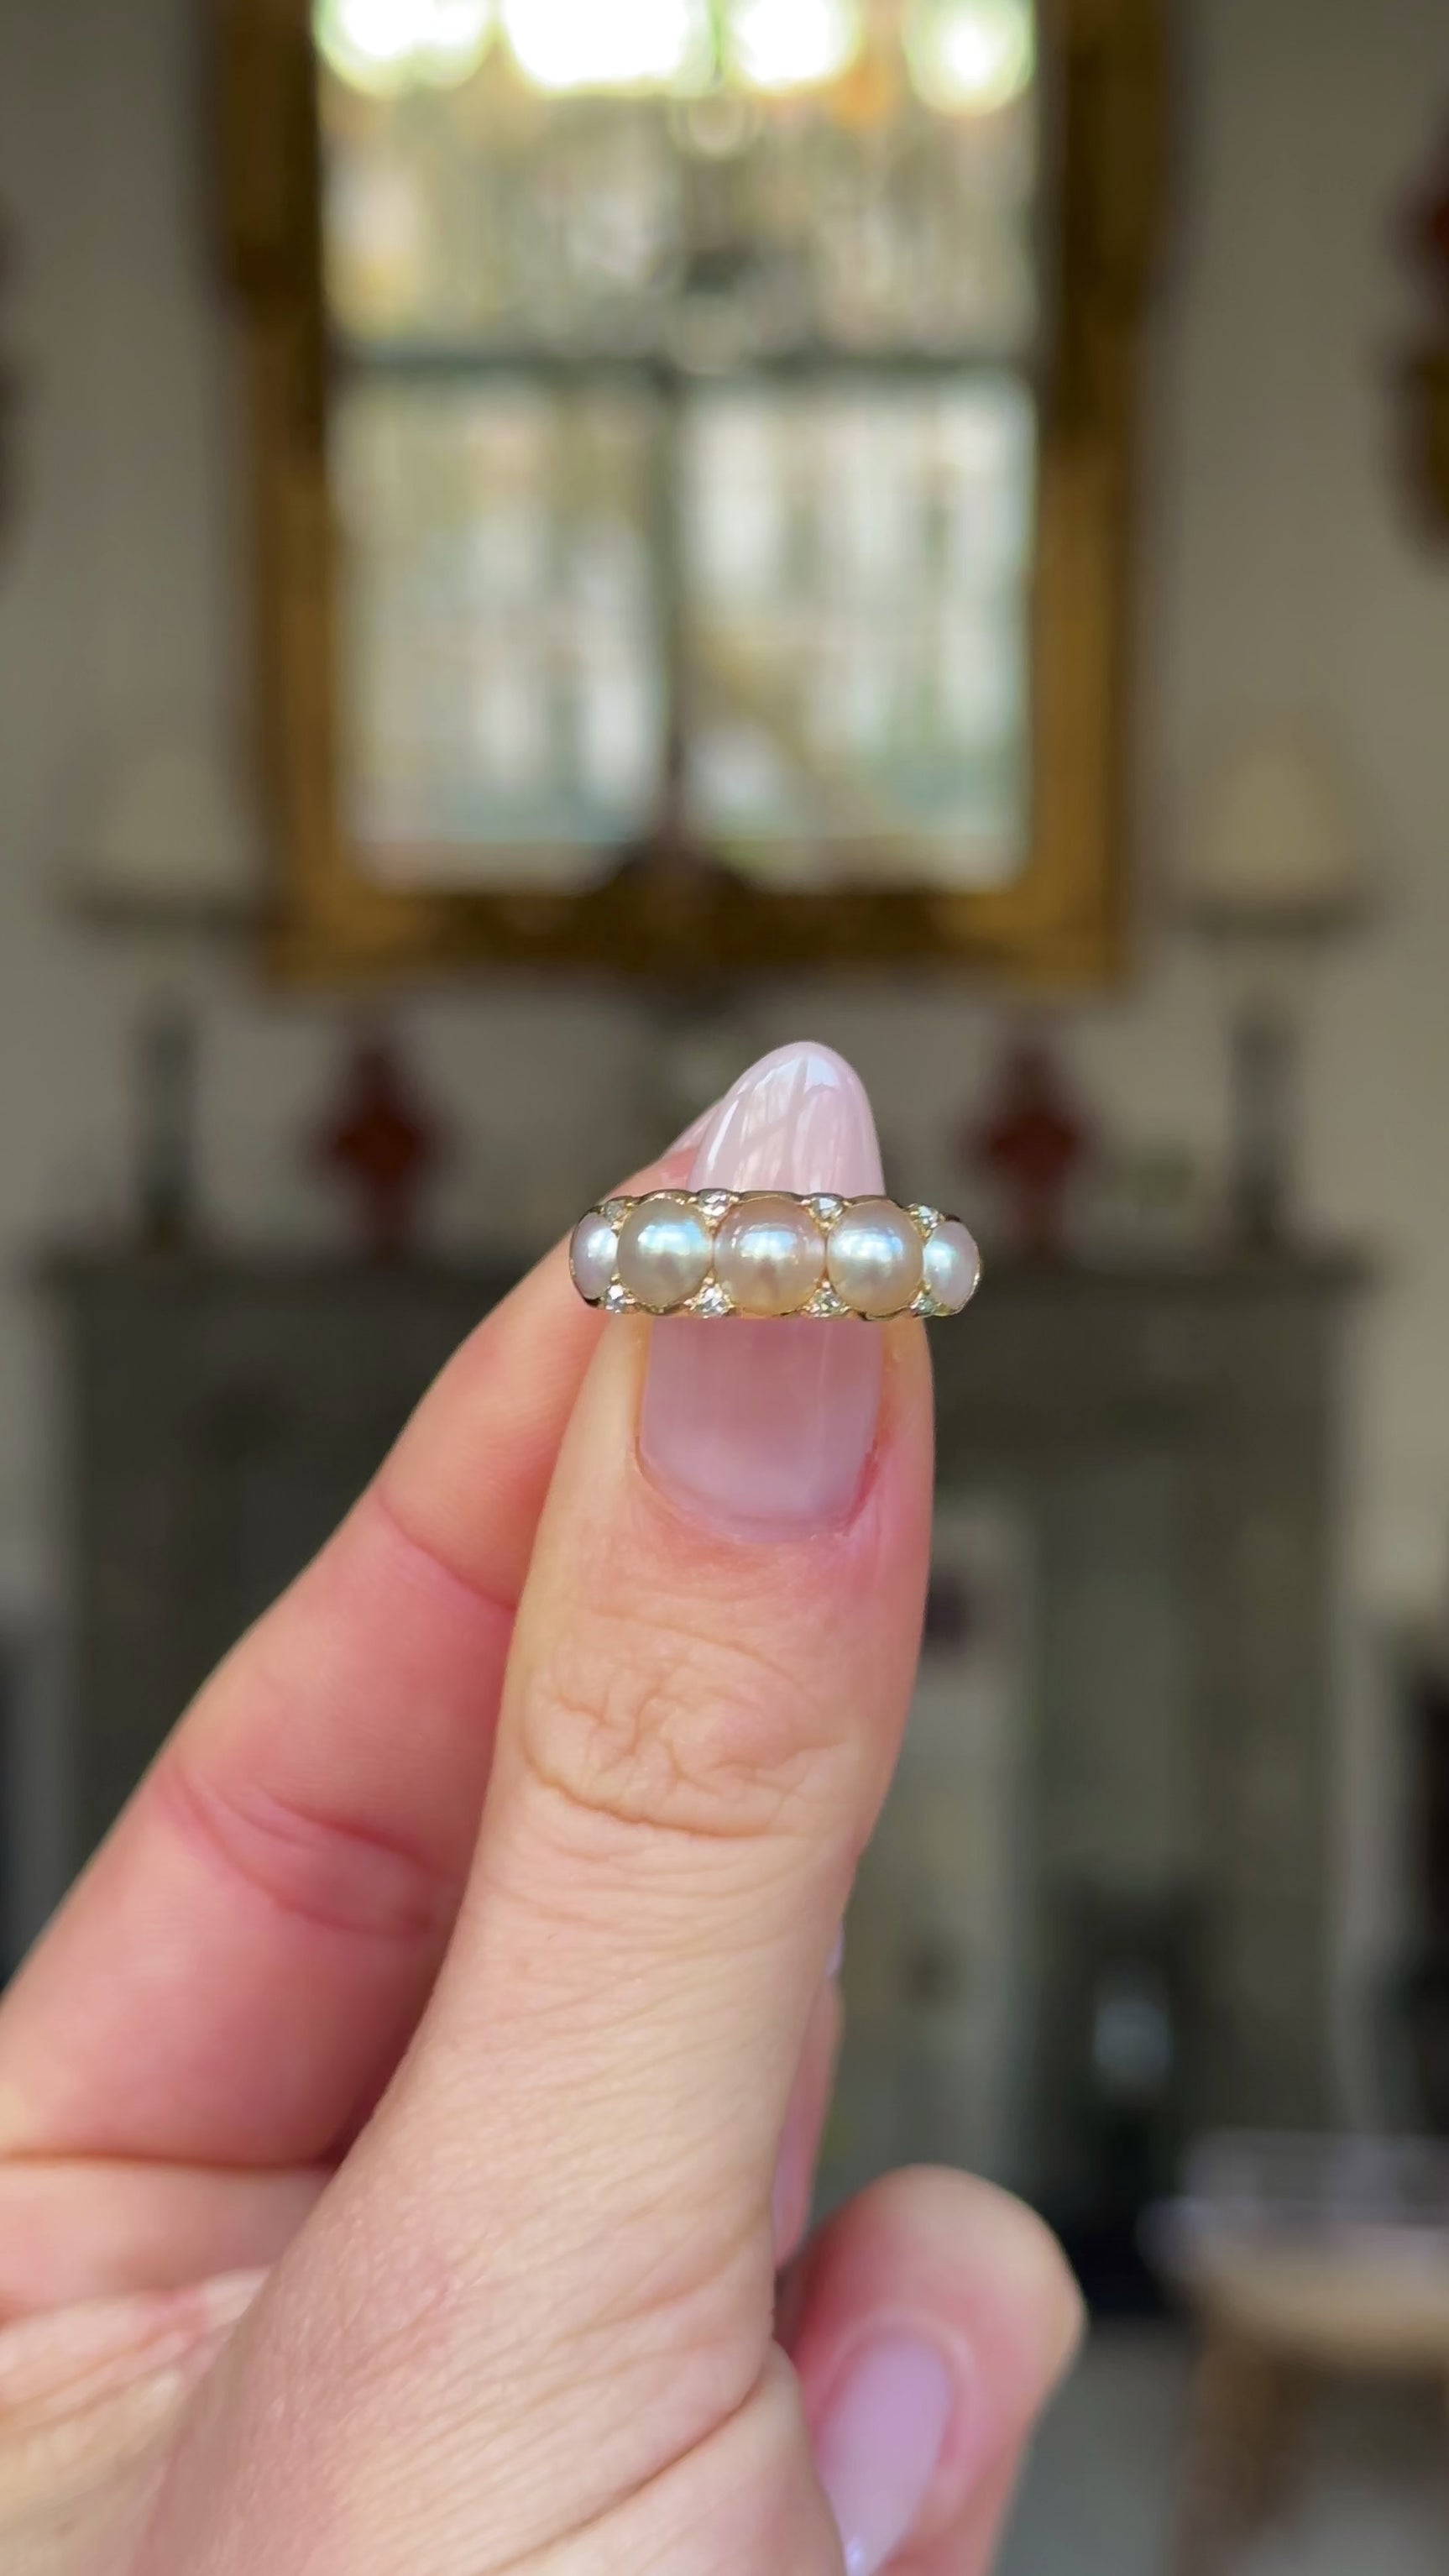 Georgian pearl half hoop ring held in fingers and moved around to give perspective.